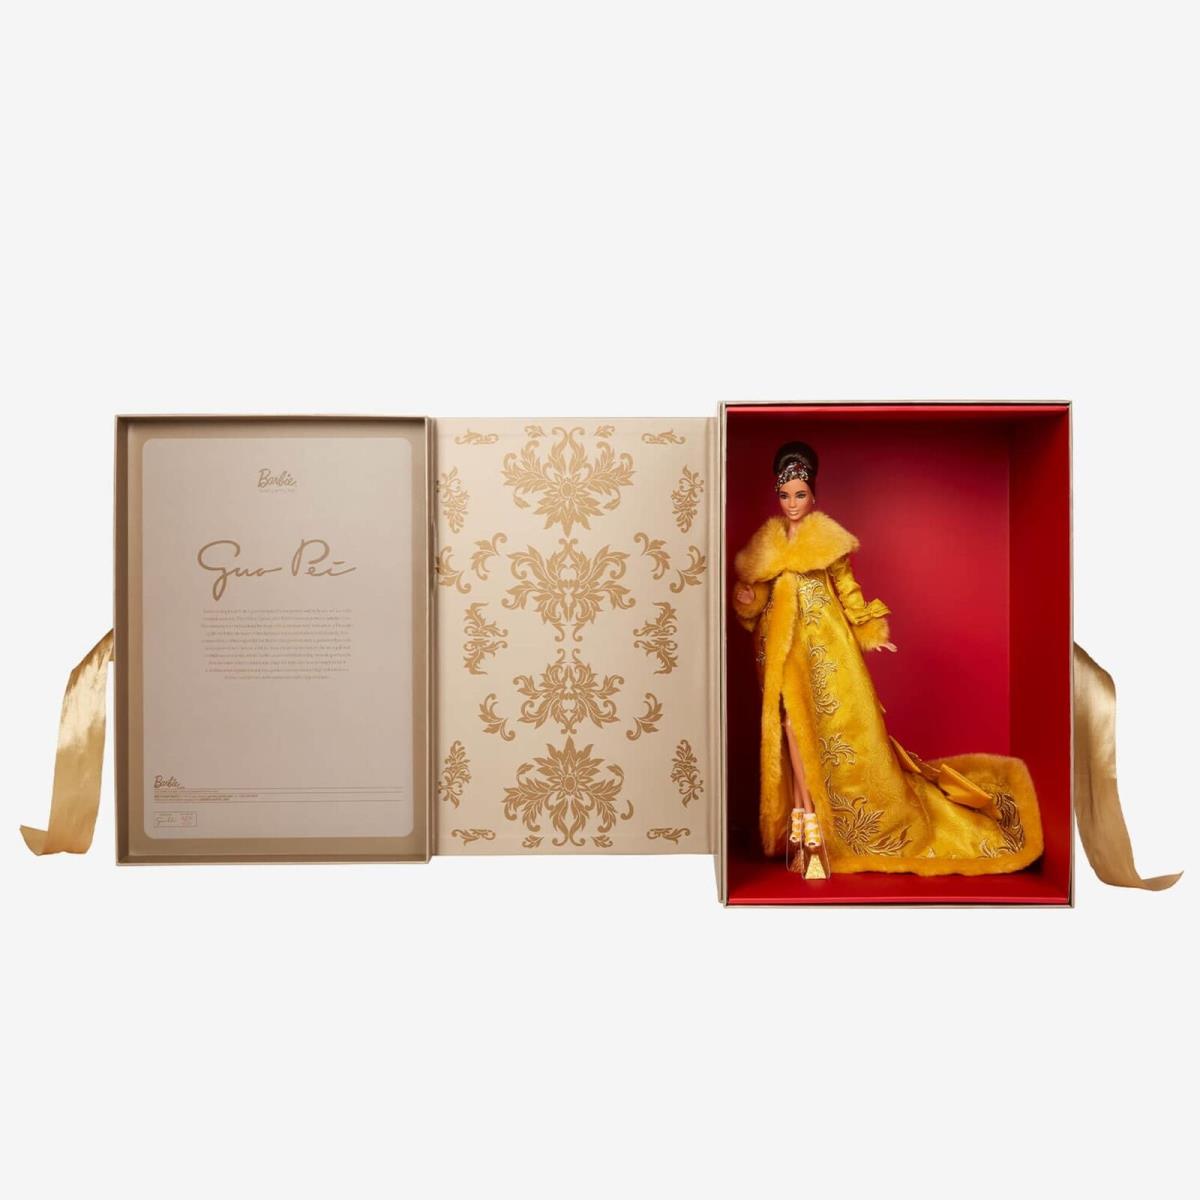 Mattel Creations Exclusive Guo Pei Barbie Doll Wearing Golden Yellow Gown